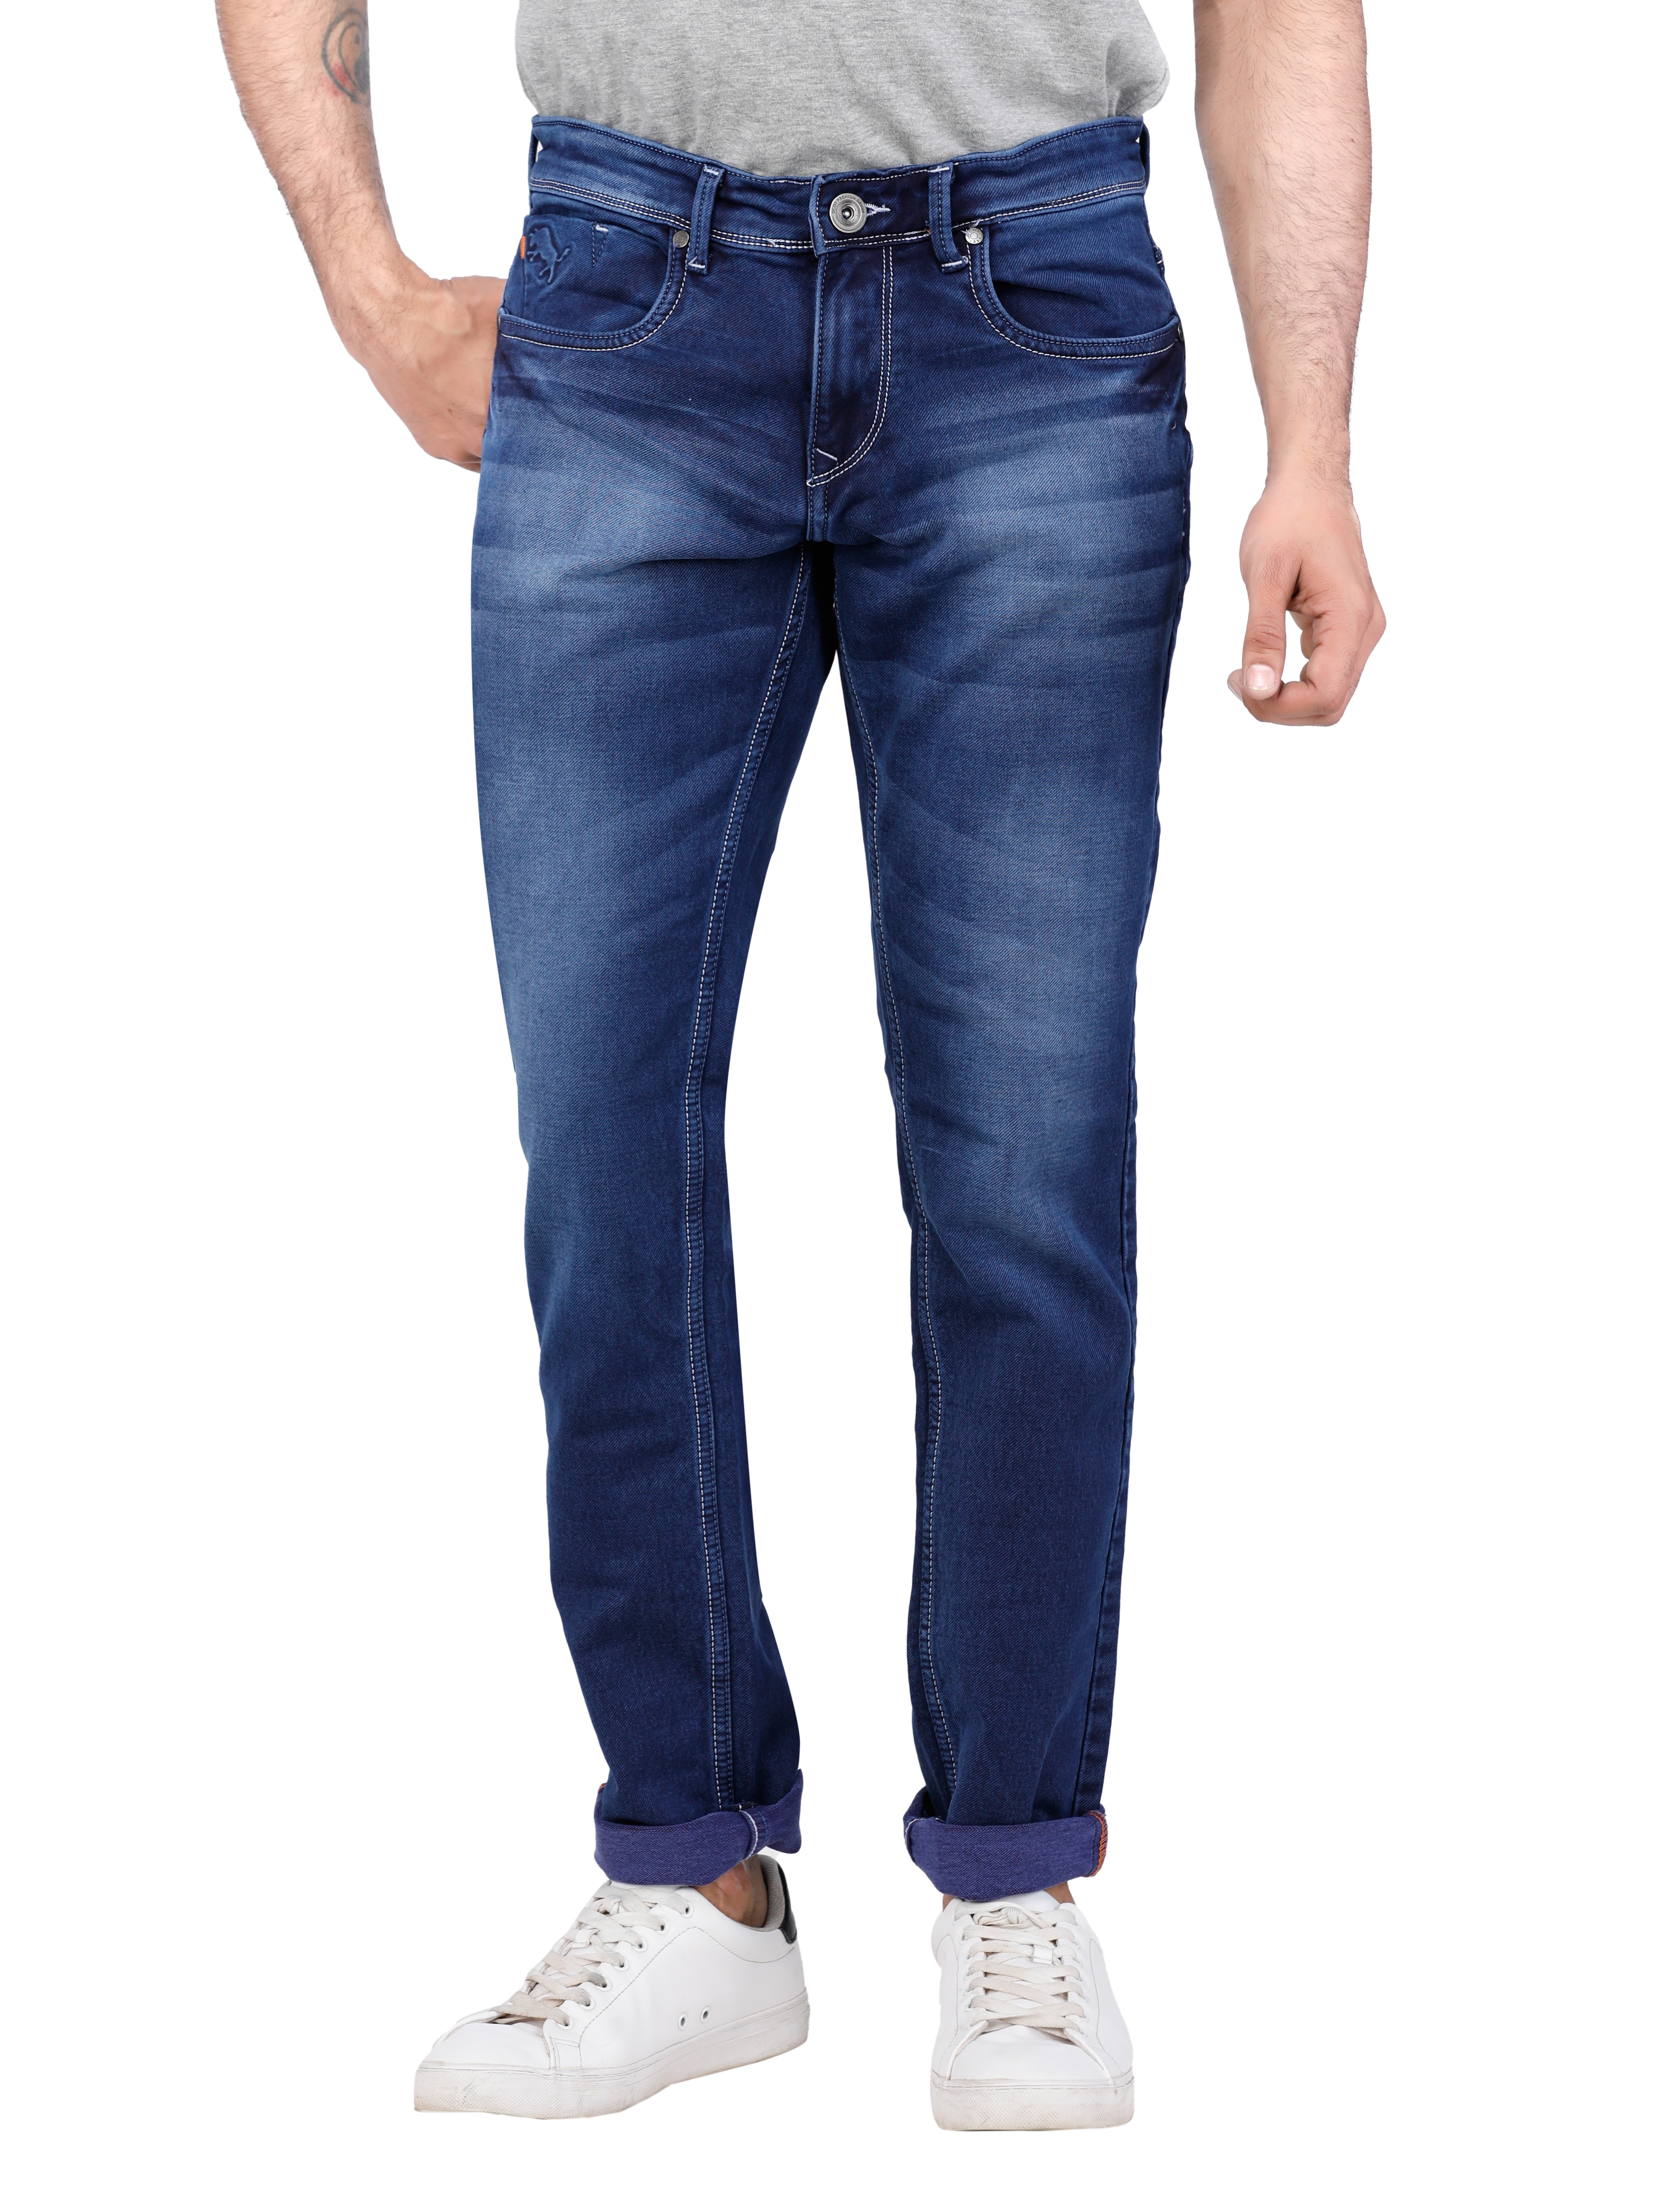 D'cot by Donear | D'cot by Donear Men Blue Cotton Slim Knitted Jeans 0